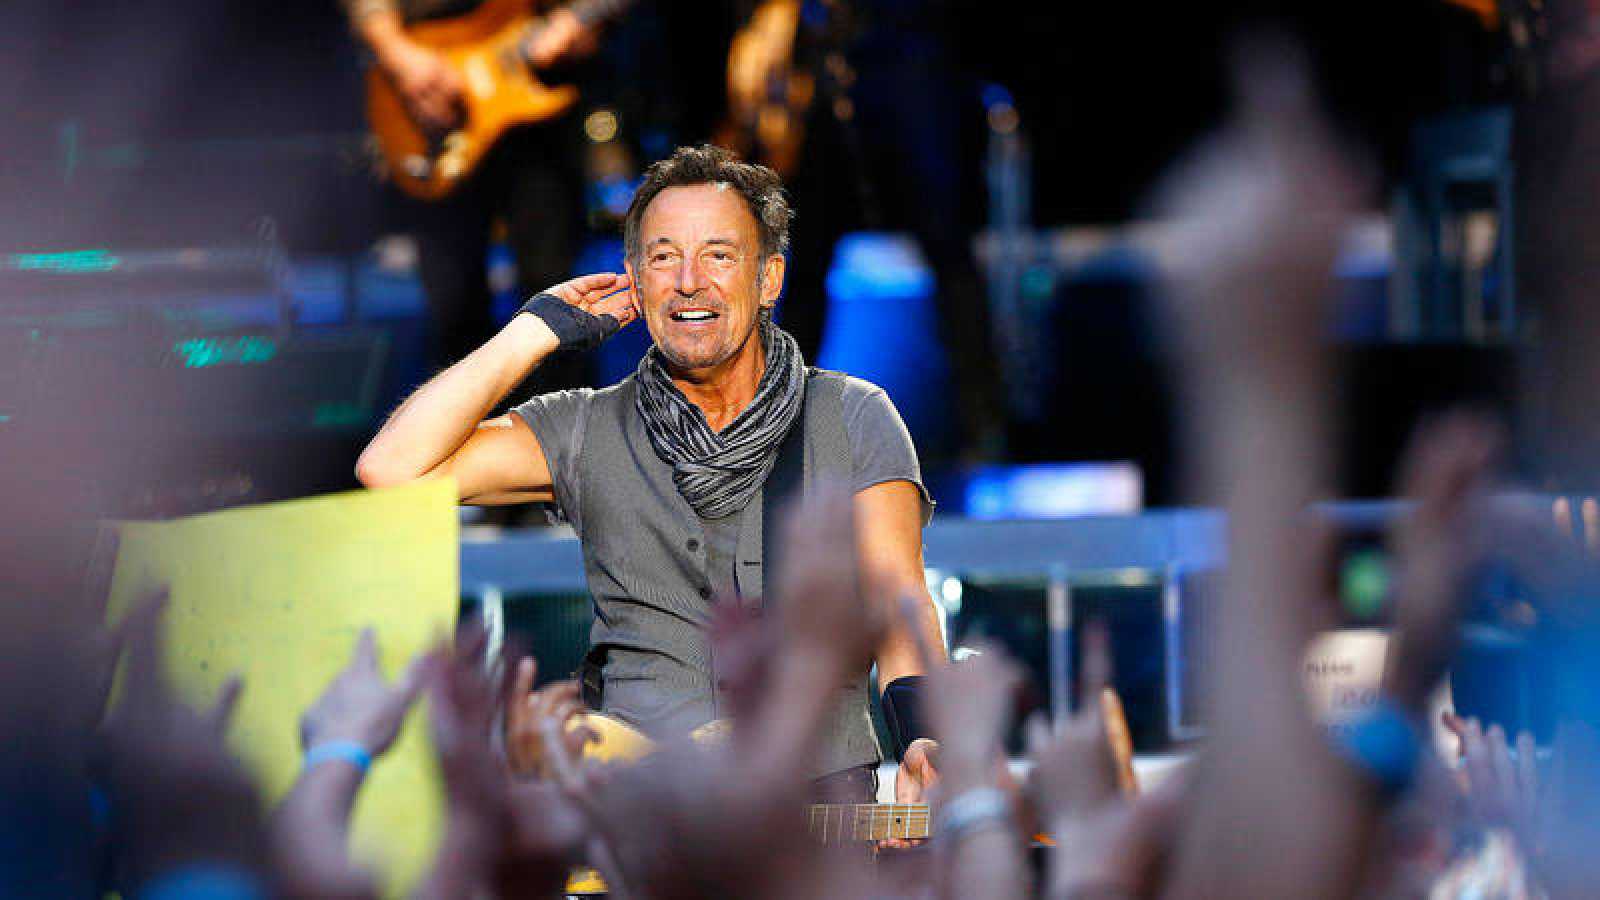 Happy birthday to the one and only Bruce Springsteen! 